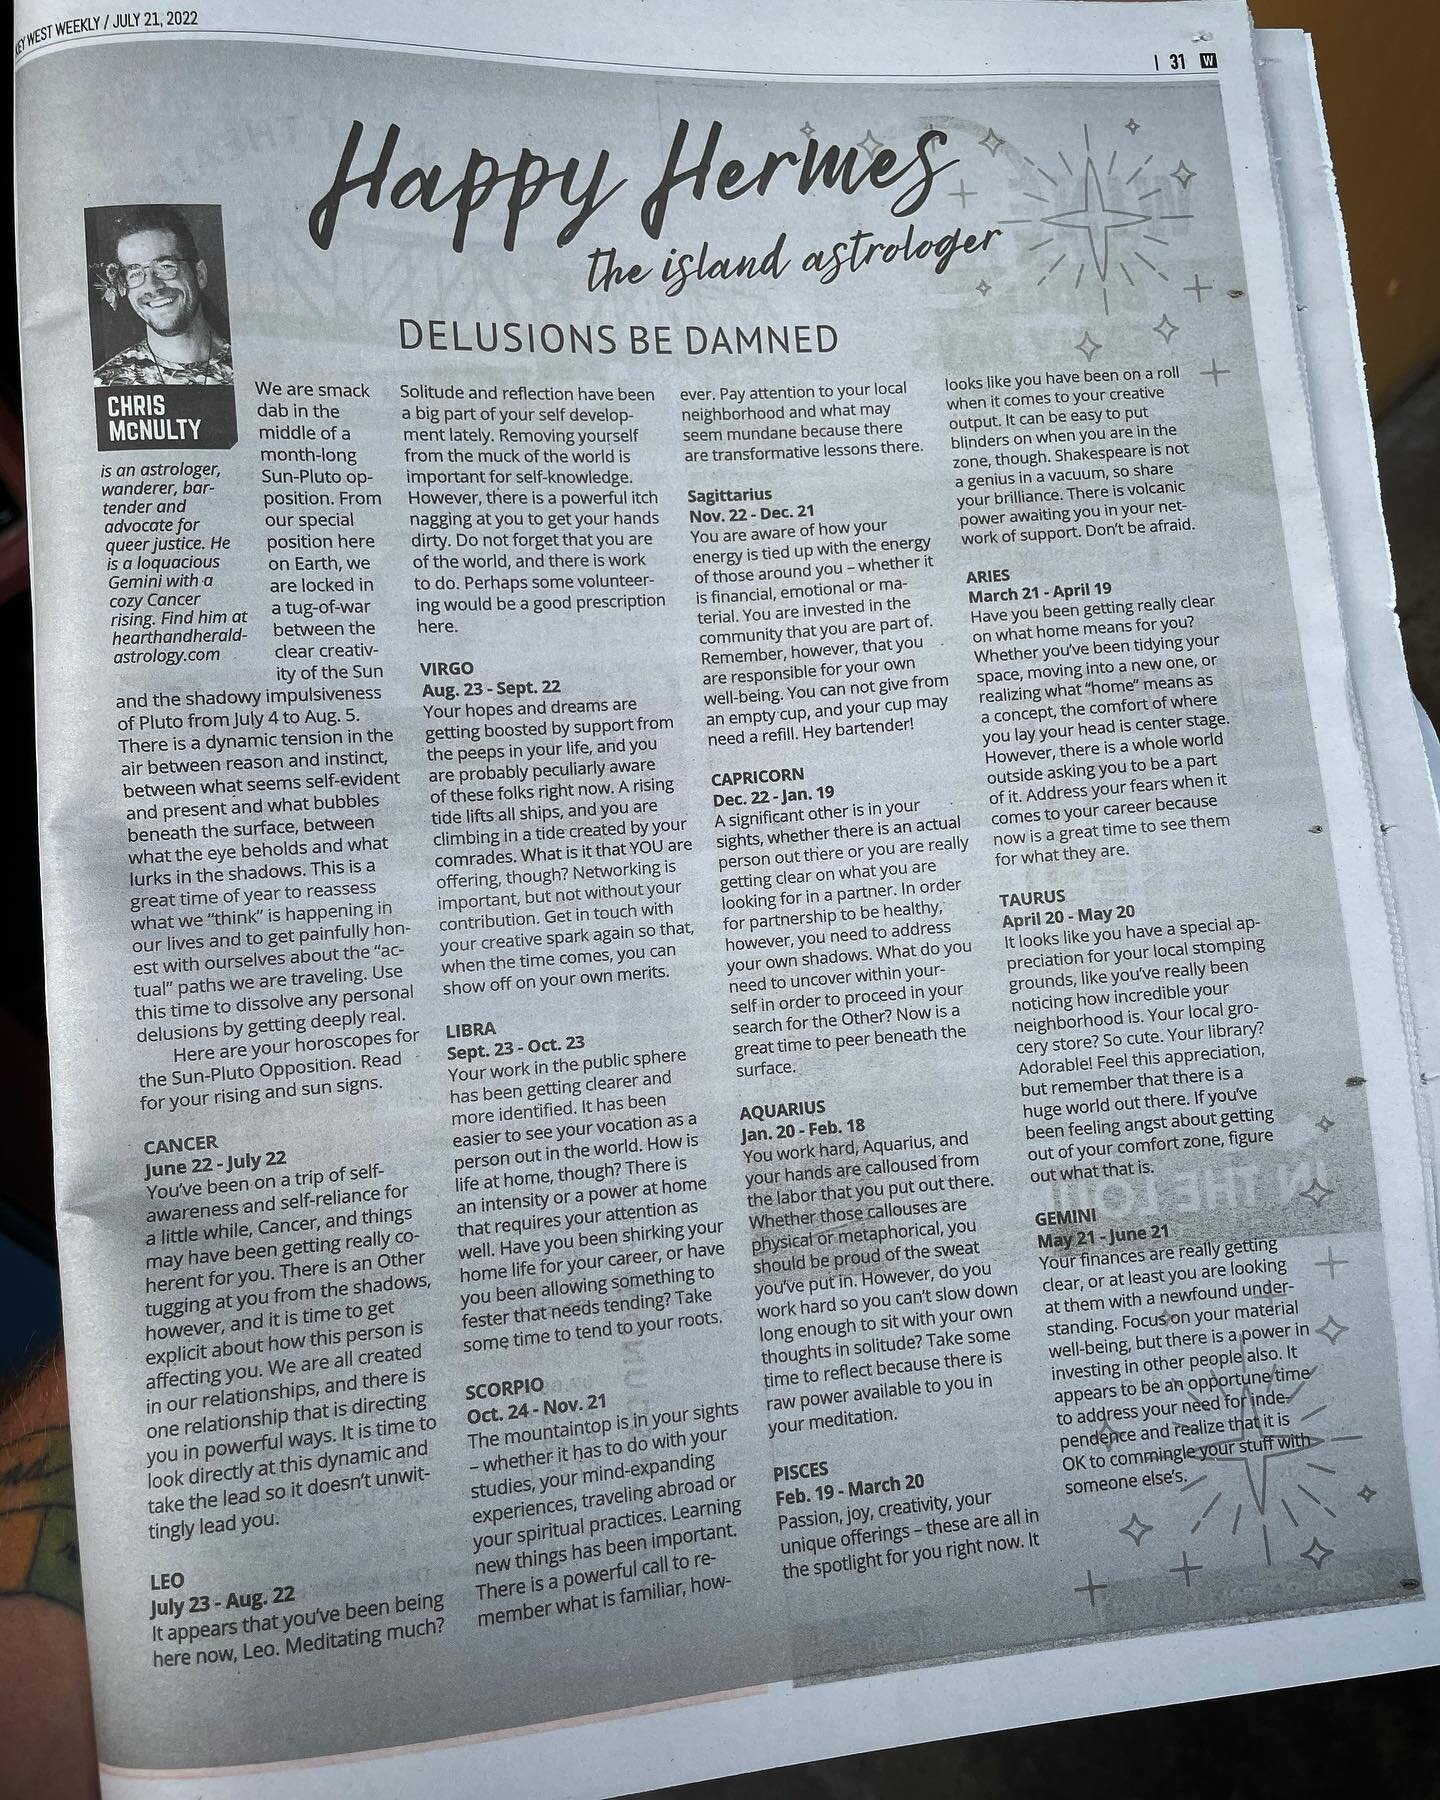 Happy Hermes Horoscopes for the Sun-Pluto opposition in this week&rsquo;s @keysweekly. Let me know if they hit!

If you are interested in a birth chart or timely transit reading, please don&rsquo;t hesitate to send my a DM.

#astrology #happyhermes #